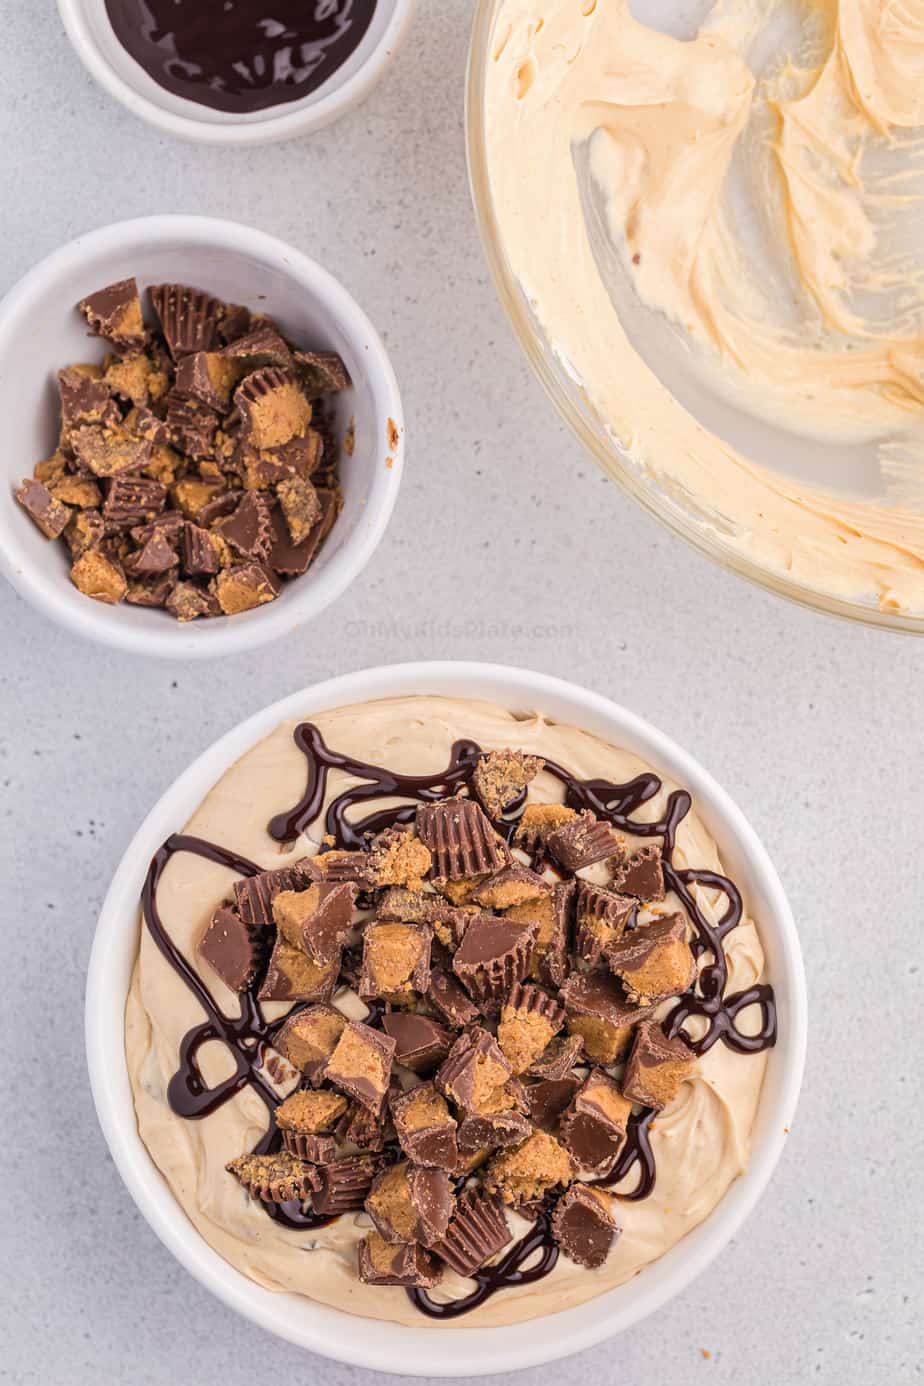 Cheesecake dip in a bowl overhead topped with peanut butter cups and chocolate. Ingredient bowls next to the dip